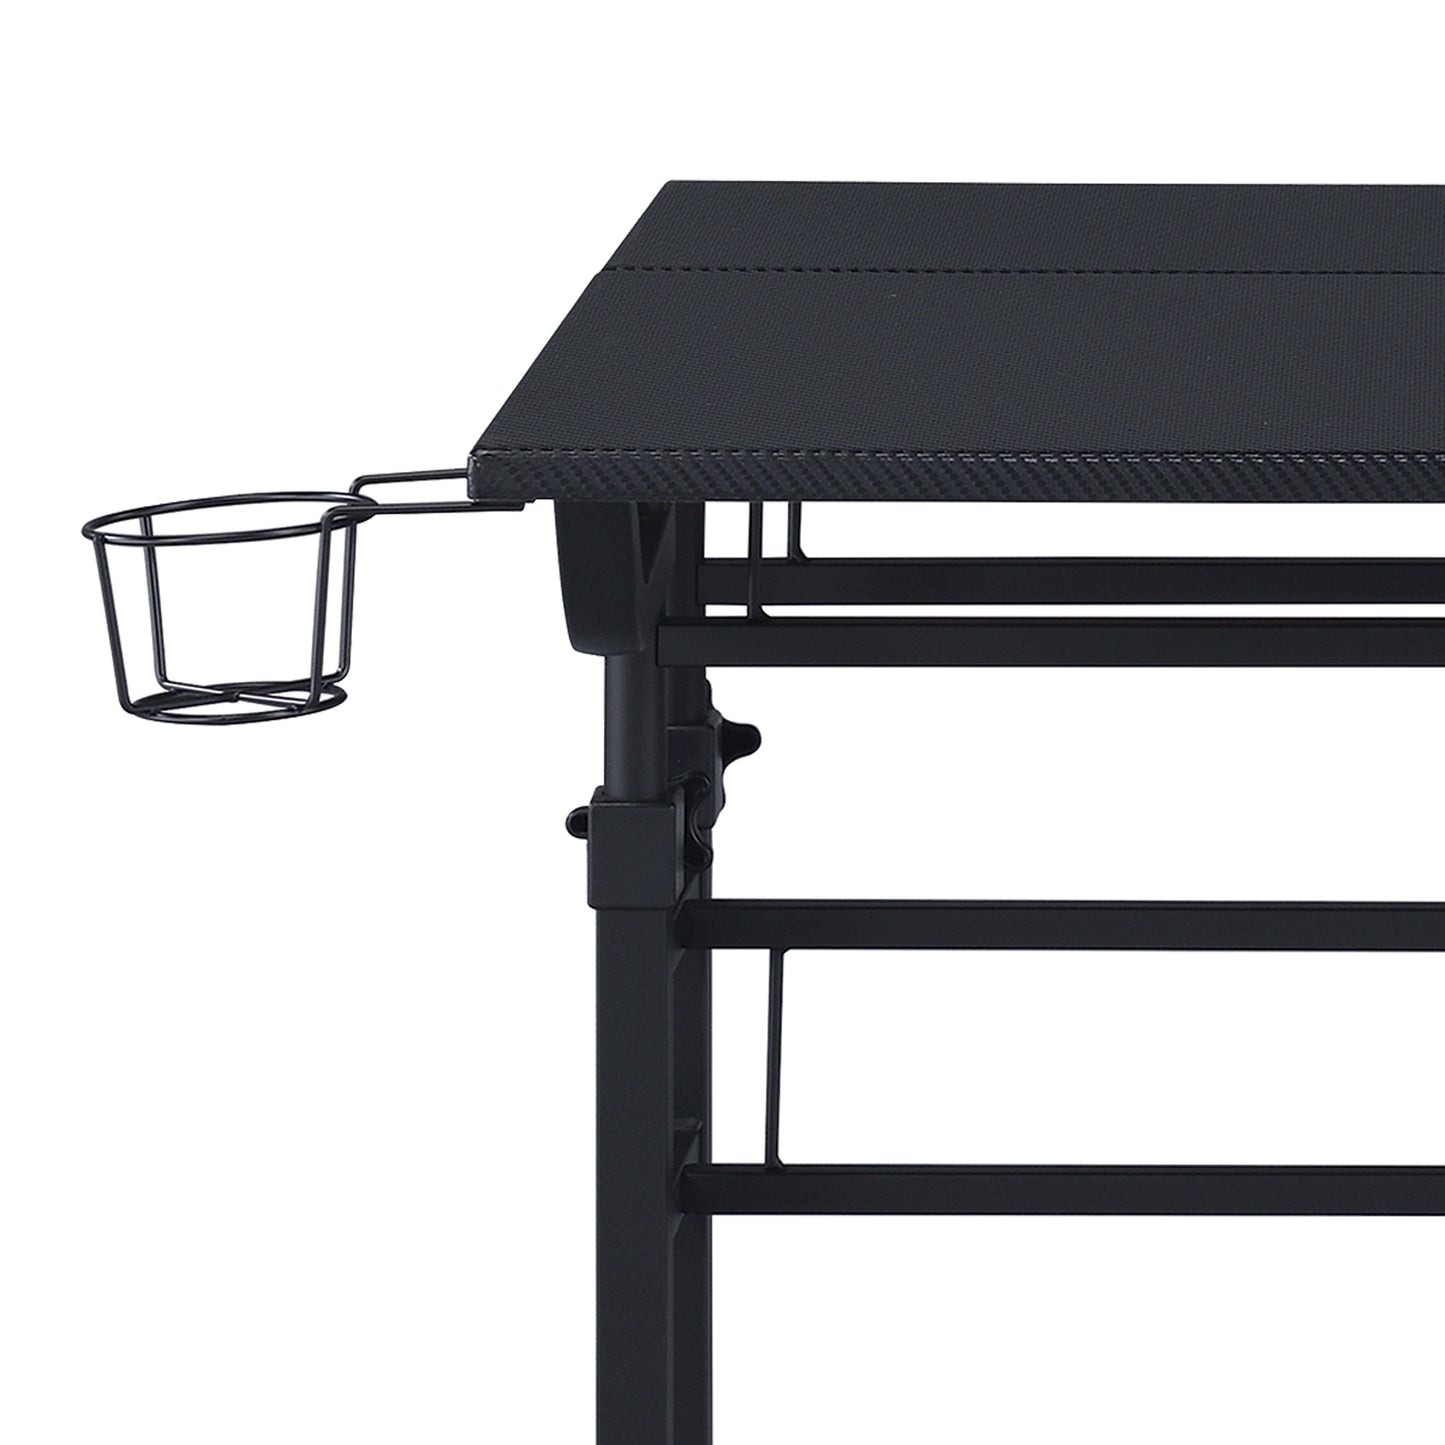 Adjustable Writing Desk with Moveable Shelf and Rolling Wheels - Black